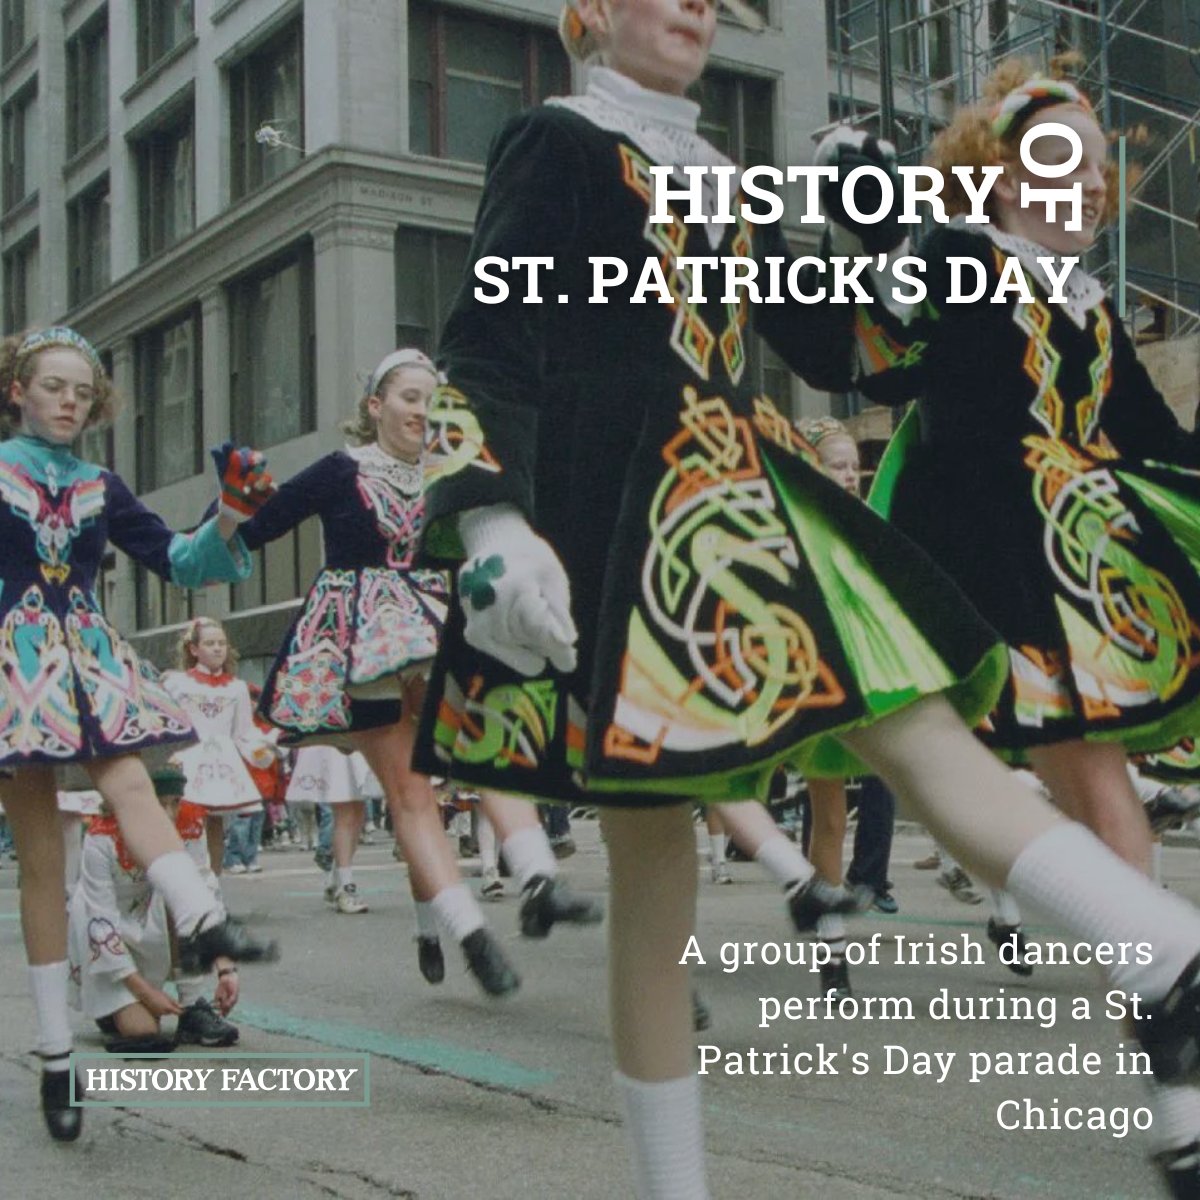 Saint Patrick's Day goes beyond green beer and parades.

It's a day steeped in history, honoring Saint Patrick's mission and the spread of Christianity in Ireland. 📖💚

How will you celebrate this rich heritage?

#IrishCulture #StPaddysDay